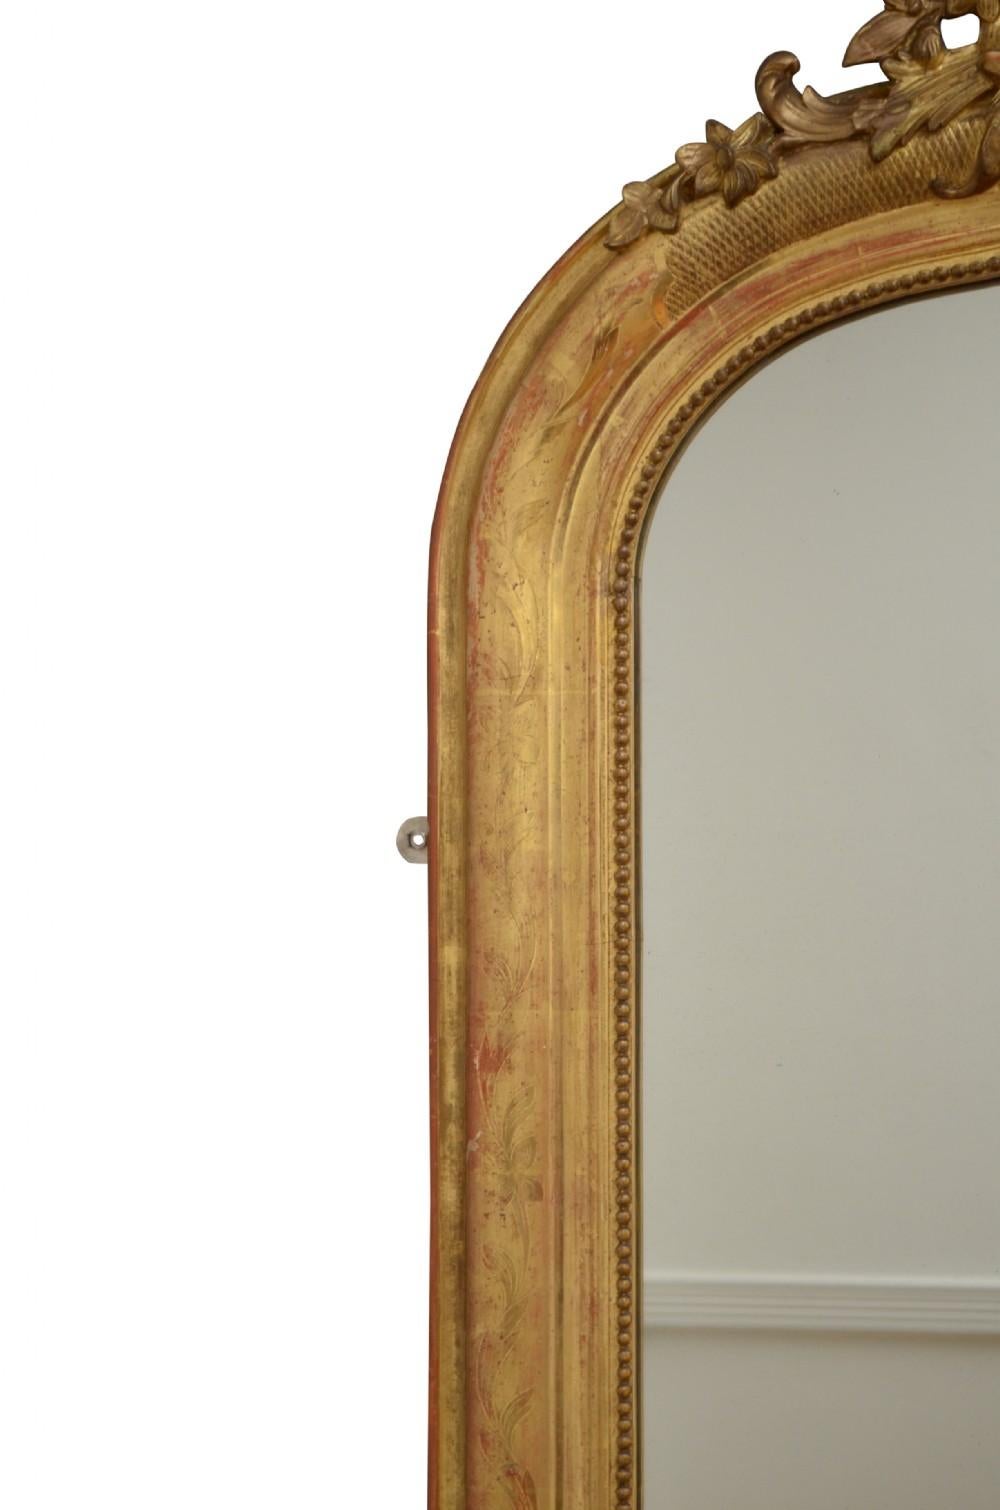 Exceptional 19th Century French Wall Mirror In Good Condition For Sale In Whaley Bridge, GB